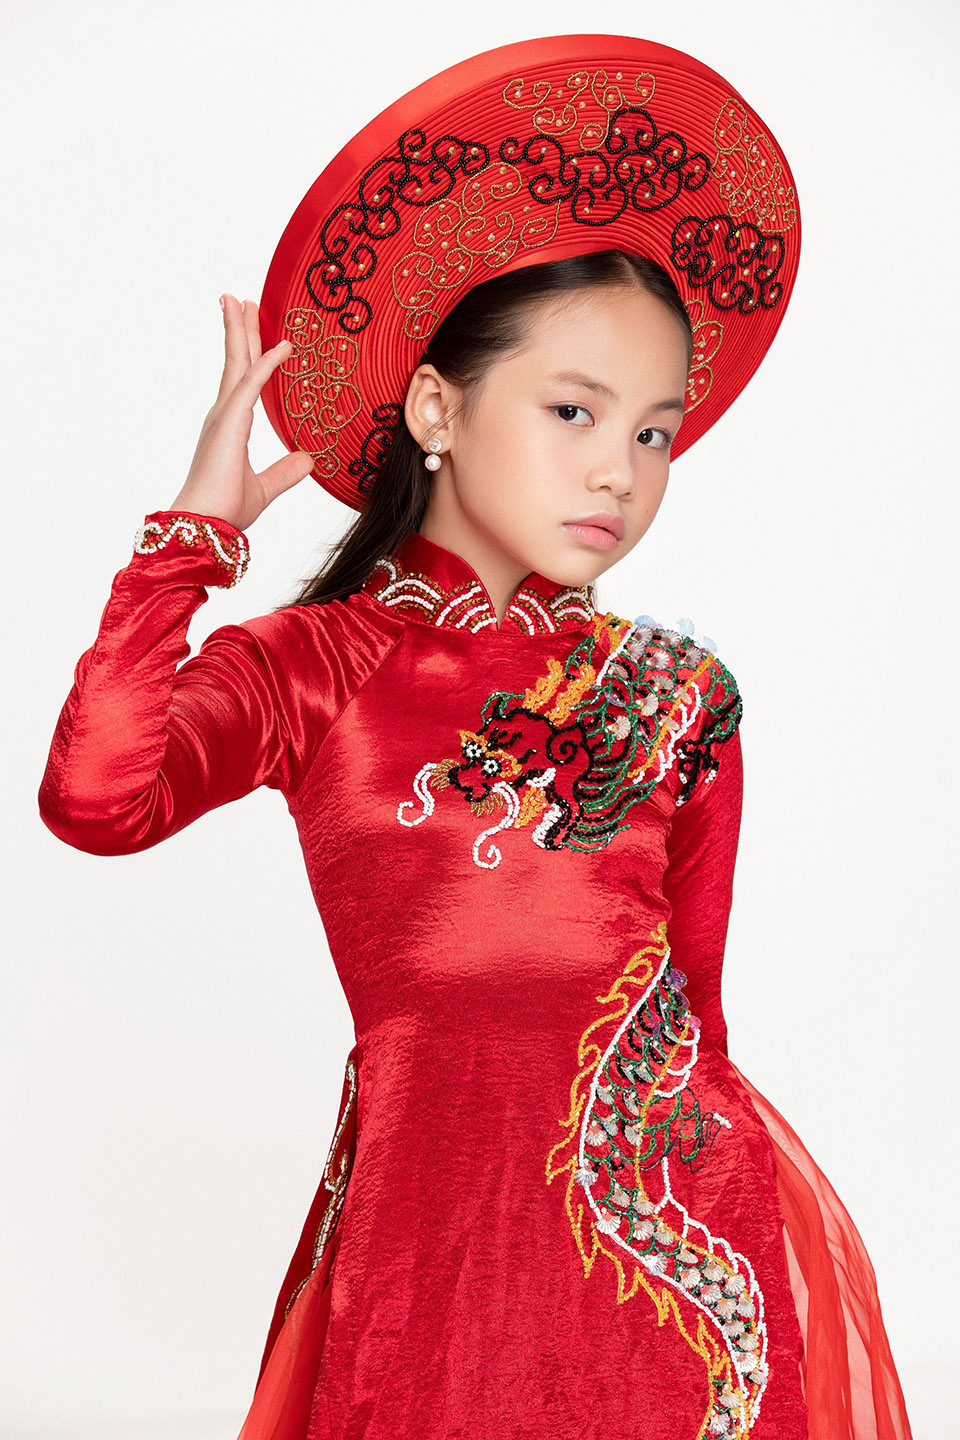 9-year-old model Phung Hieu Anh was crowned 